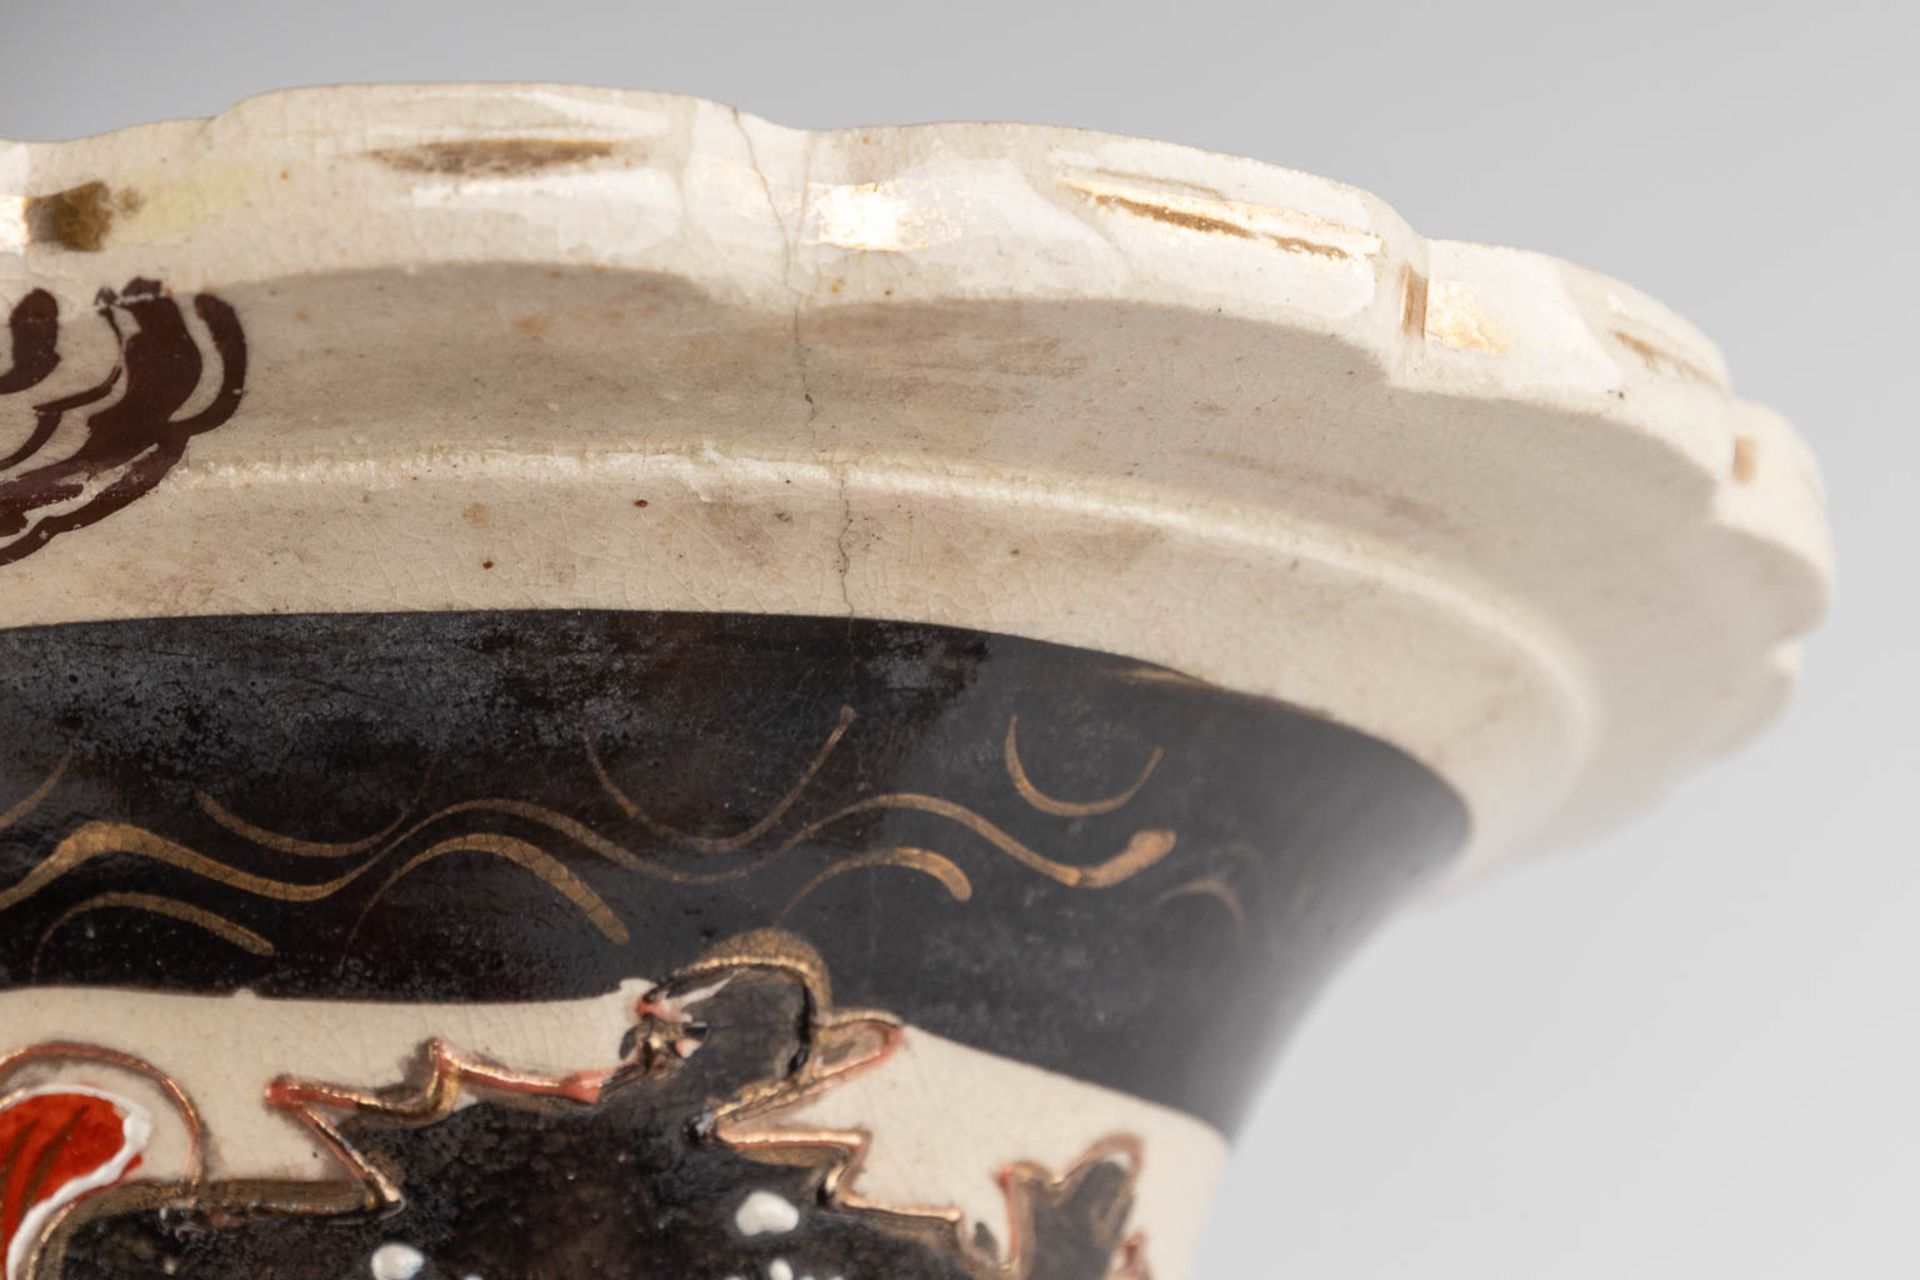 A large and decorative Japanese Satsuma vase. 20th C. (H:80 x D:32 cm) - Image 15 of 16